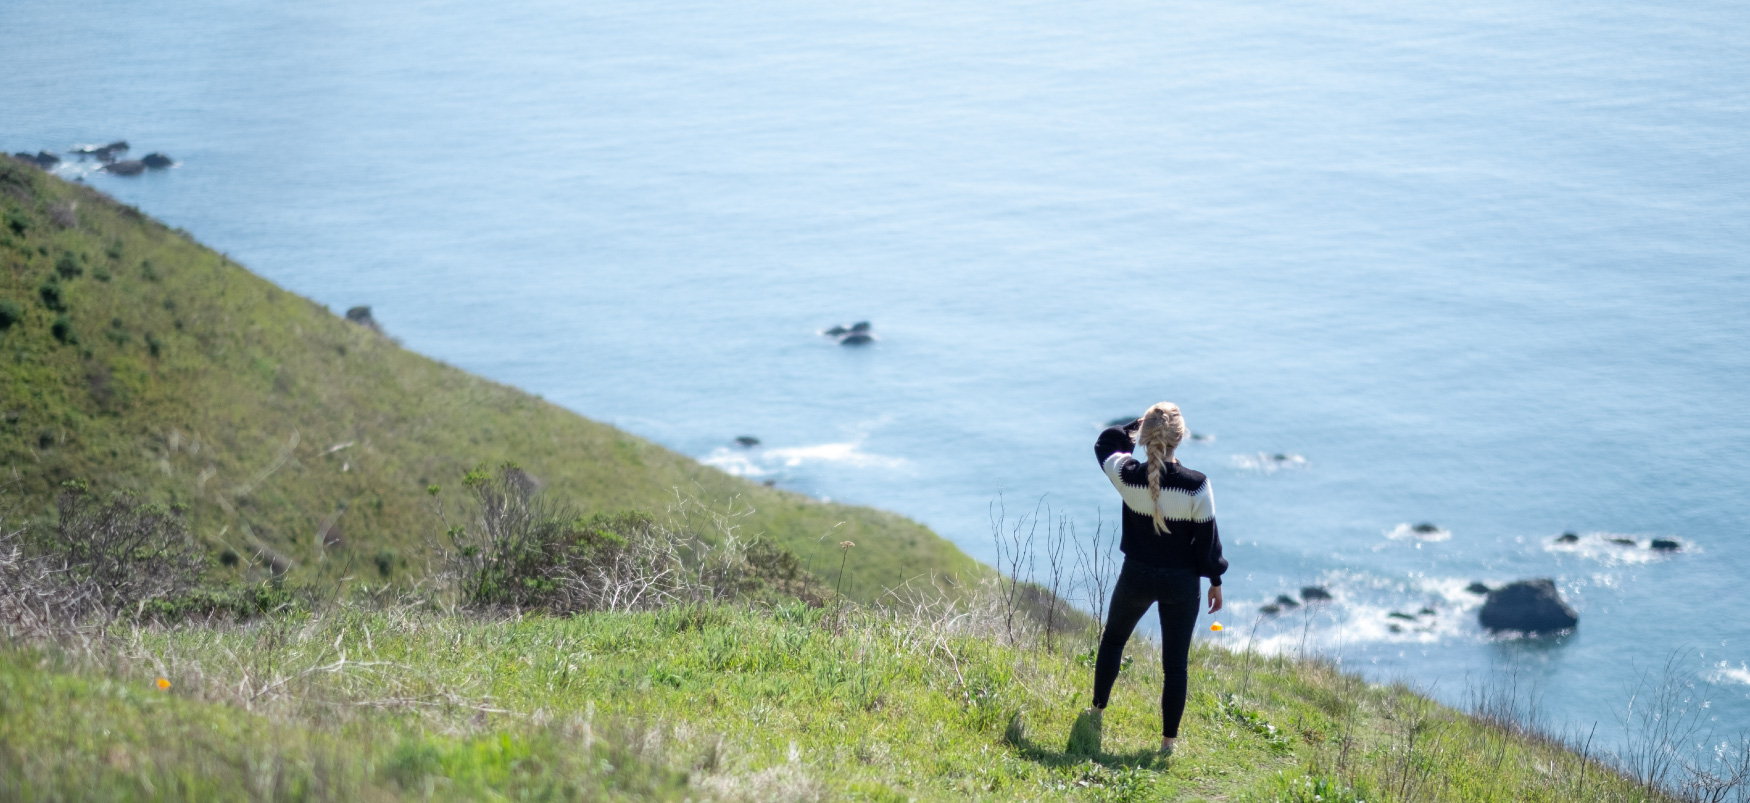 A person stands on a grassy hillside, shielding their eyes from the sun and looking out over the ocean.